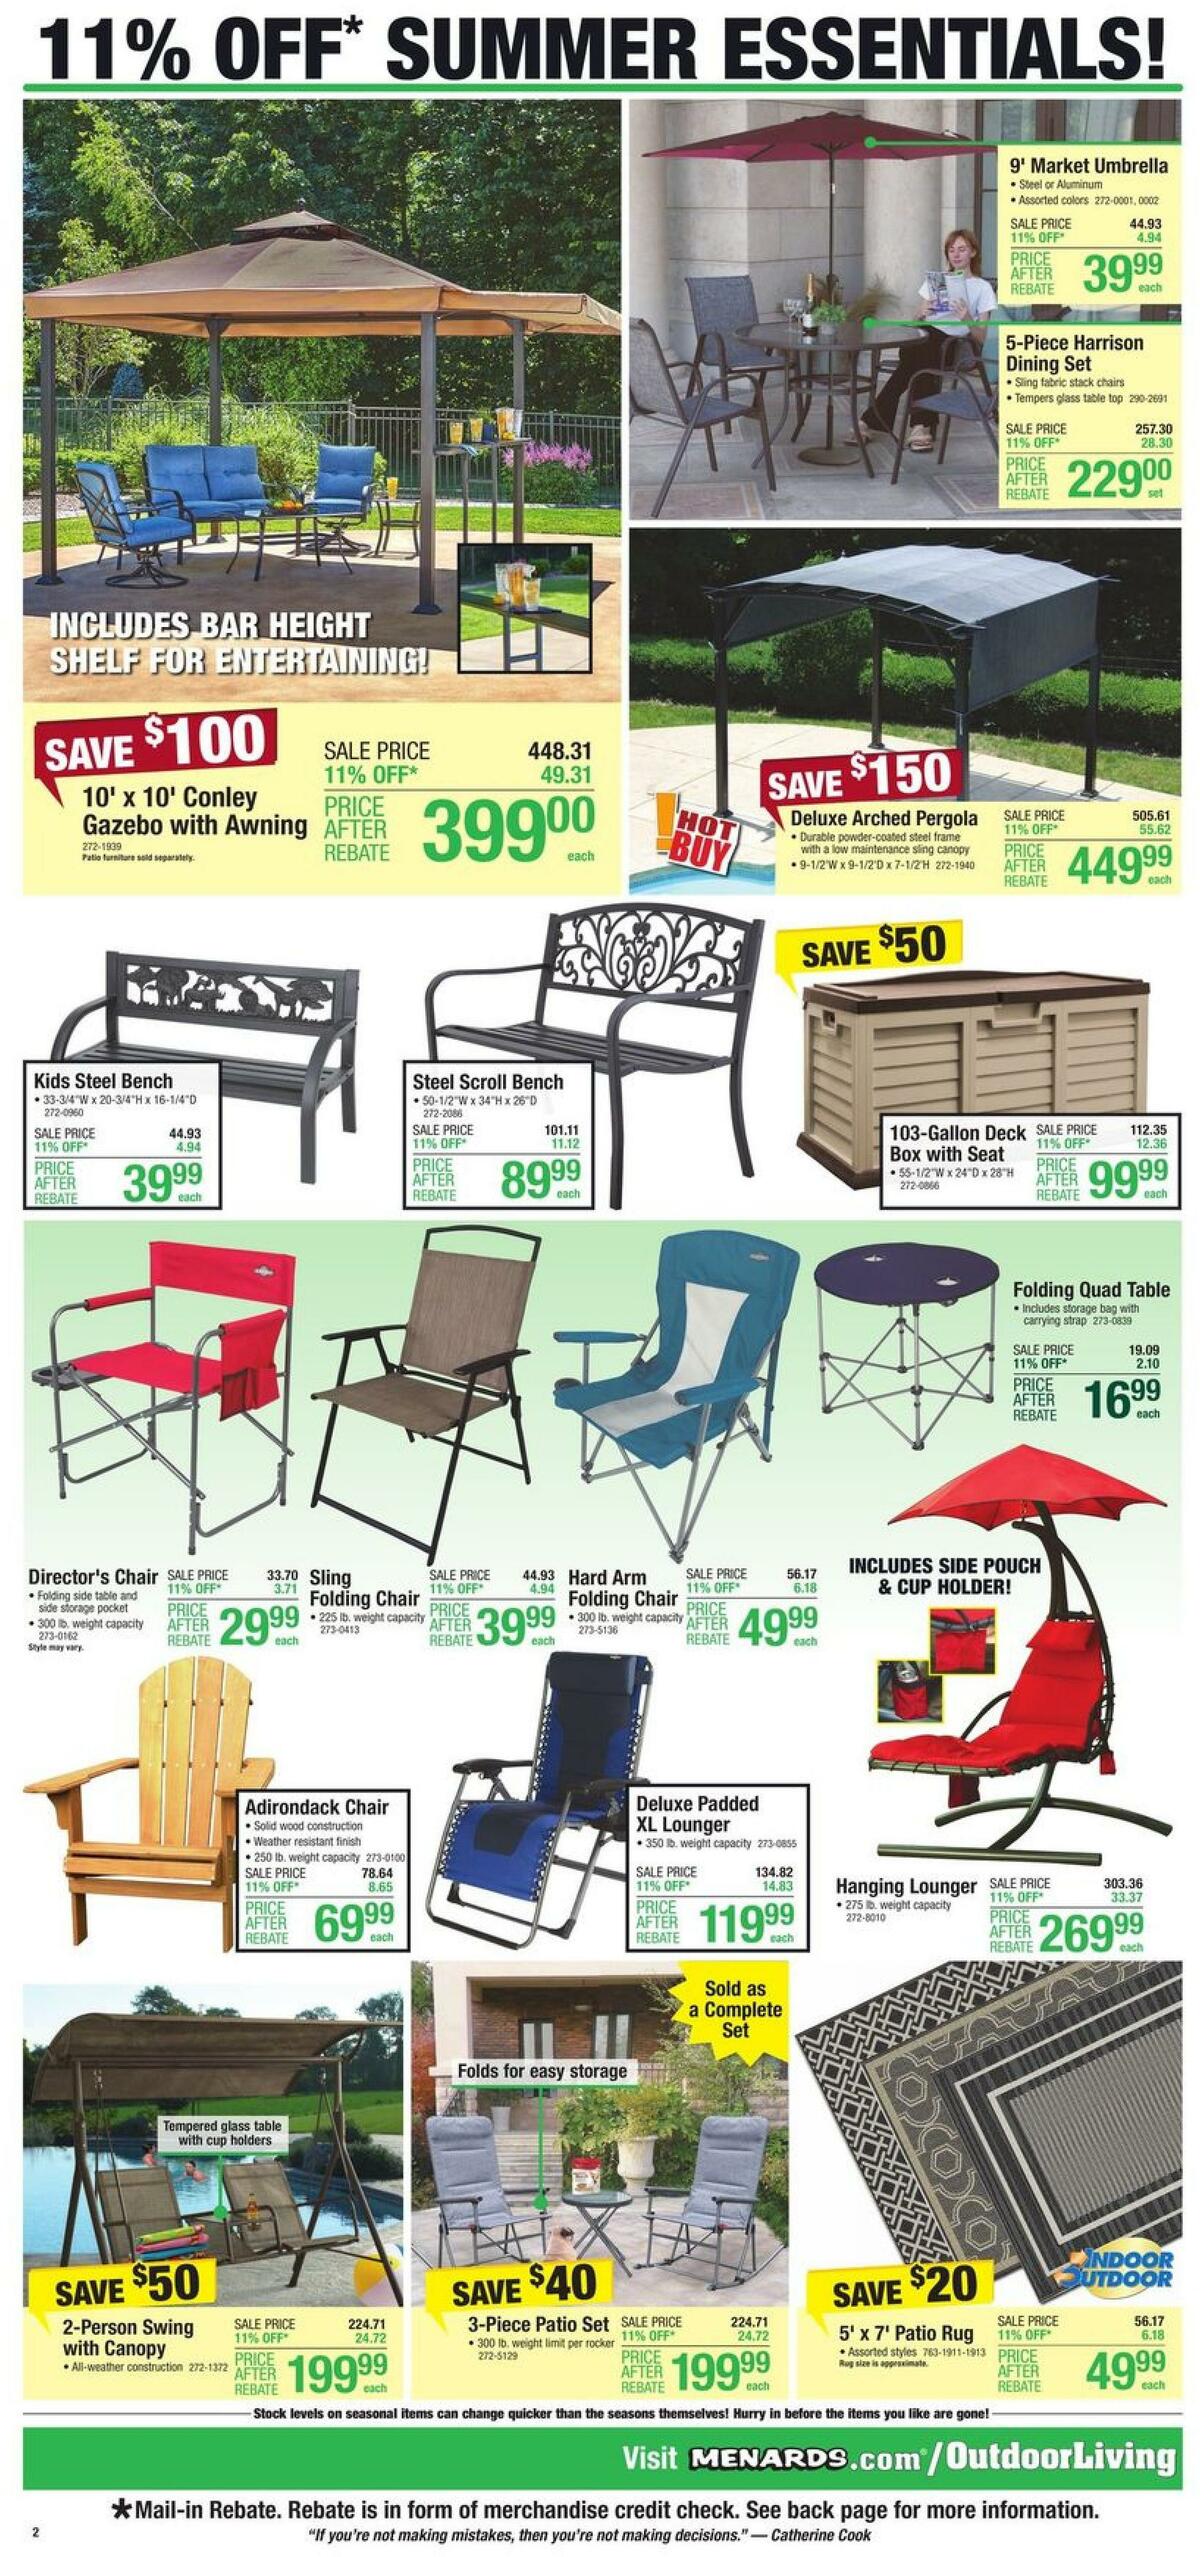 Menards Outdoor Living Weekly Ad from May 4